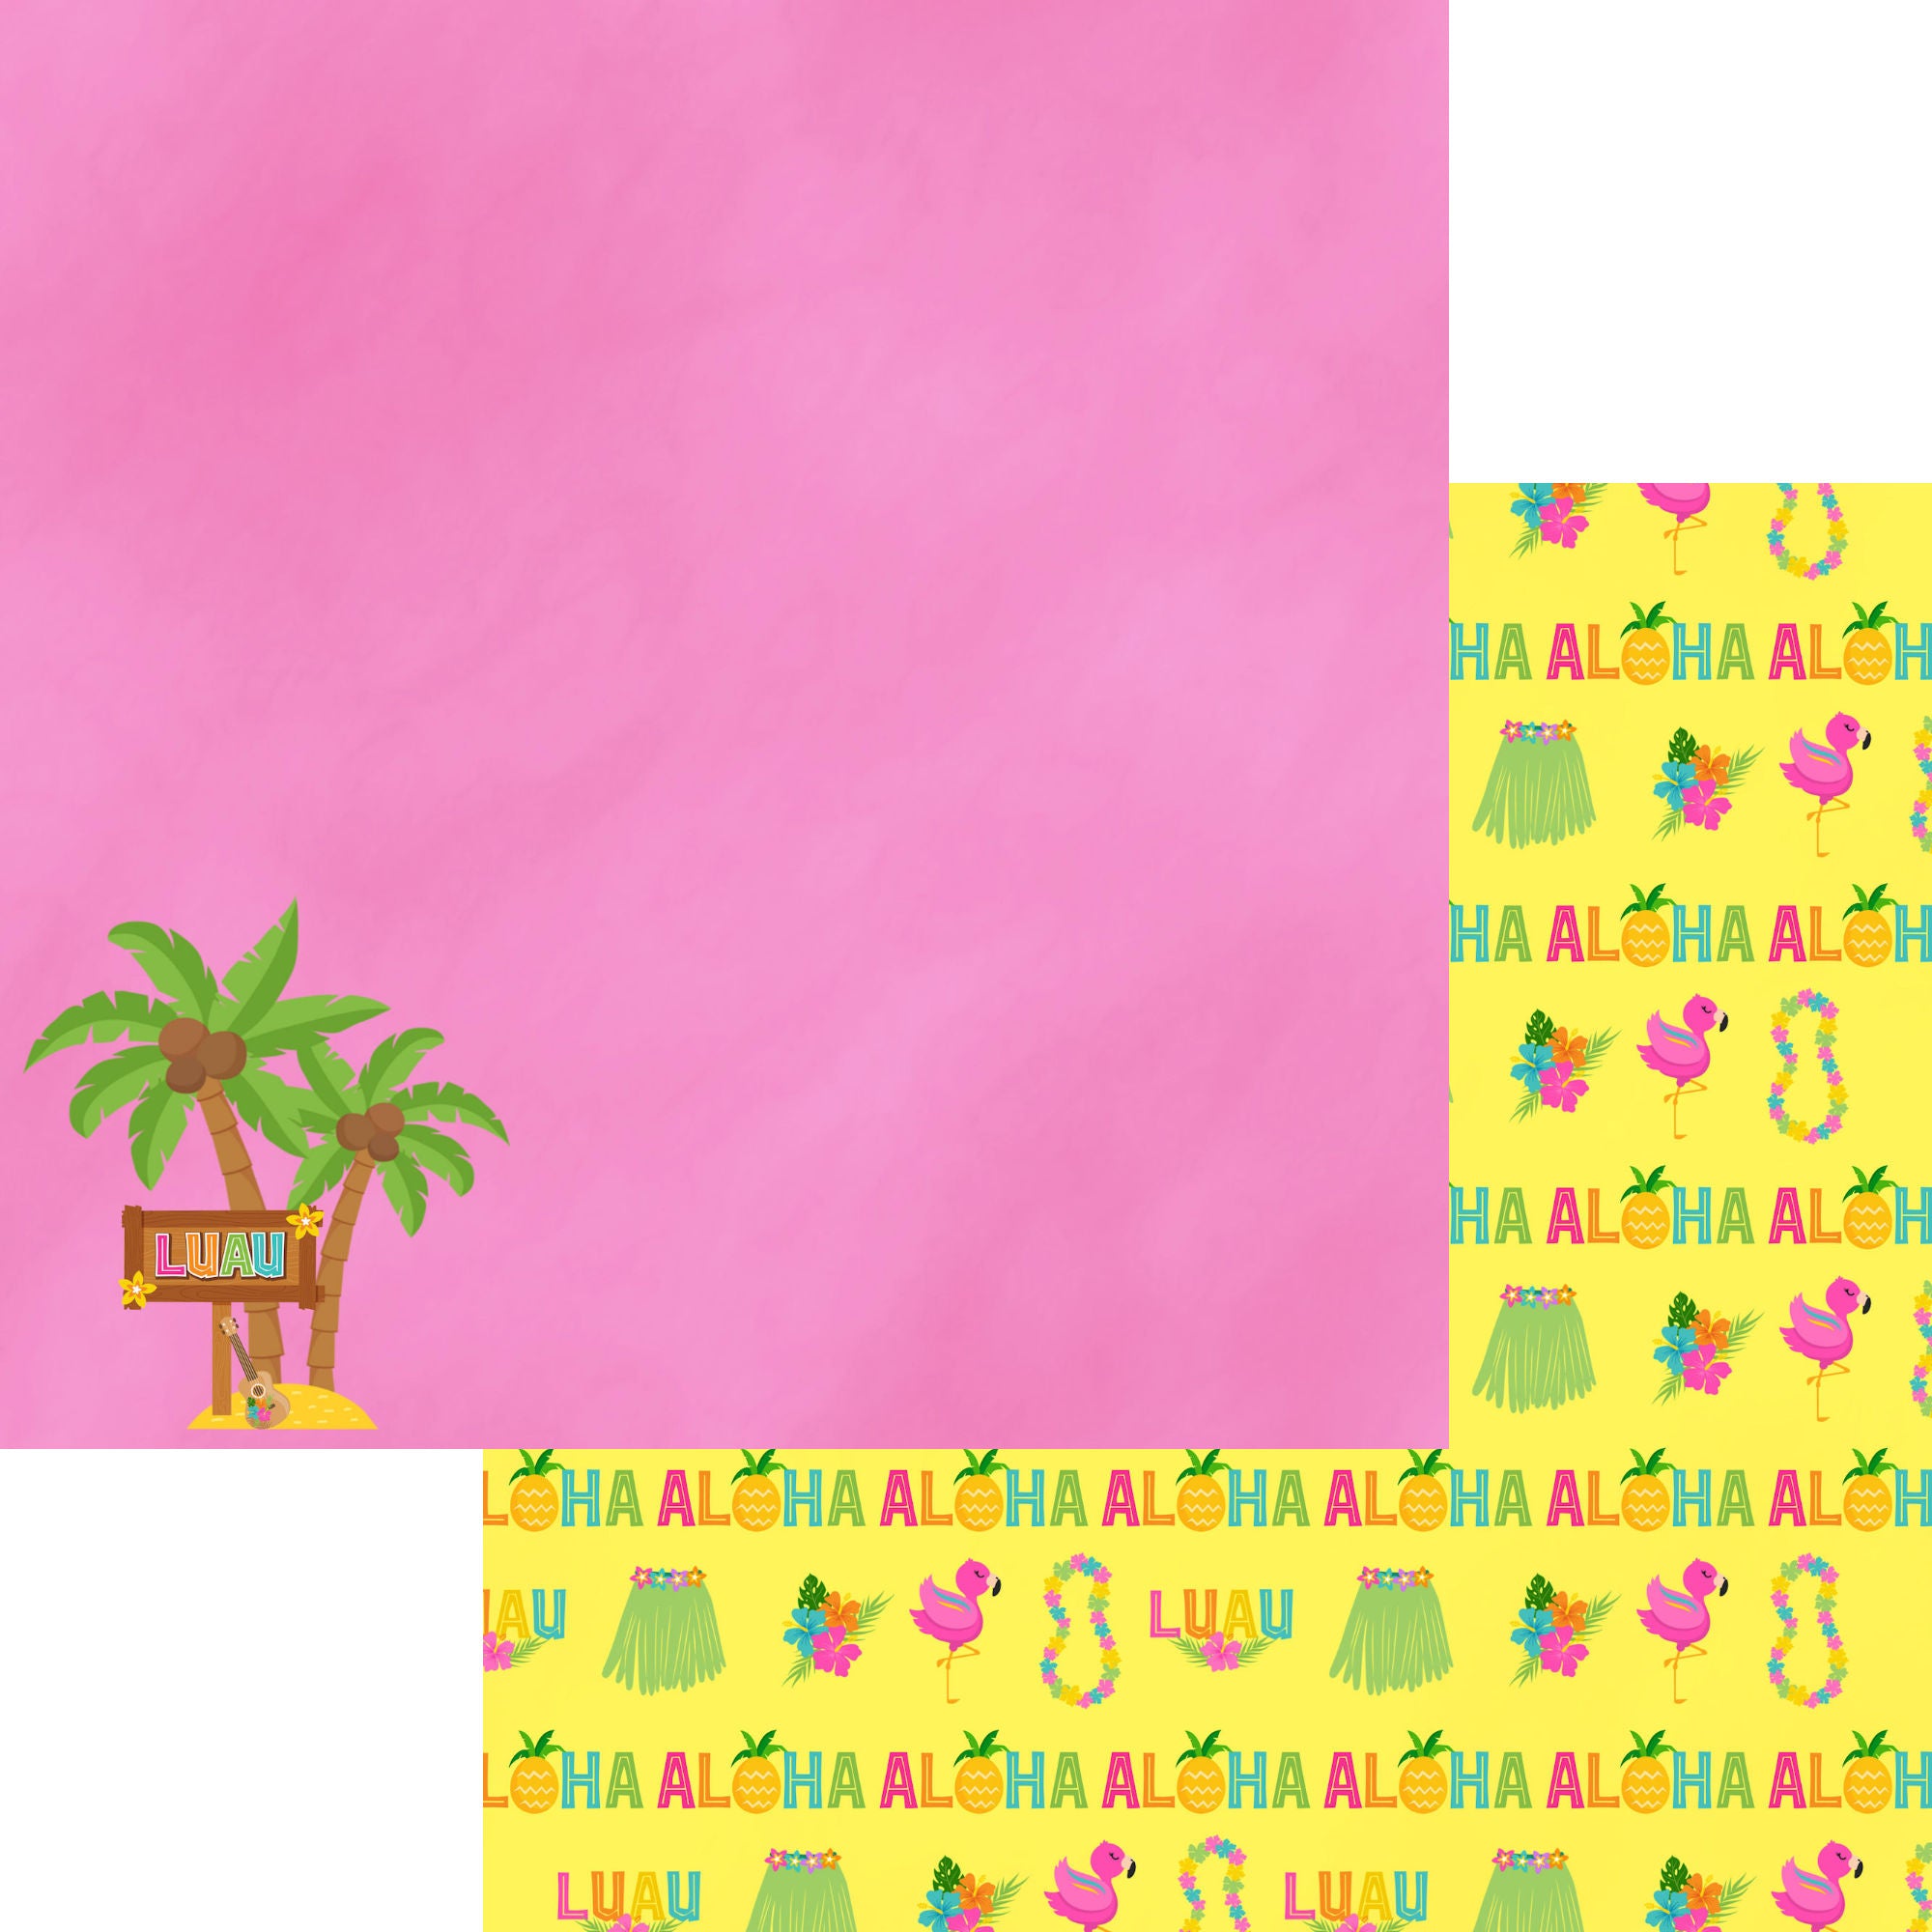 Hawaiian Luau Collection This Way To The Luau 12 x 12 Double-Sided Scrapbook Paper by SSC Designs